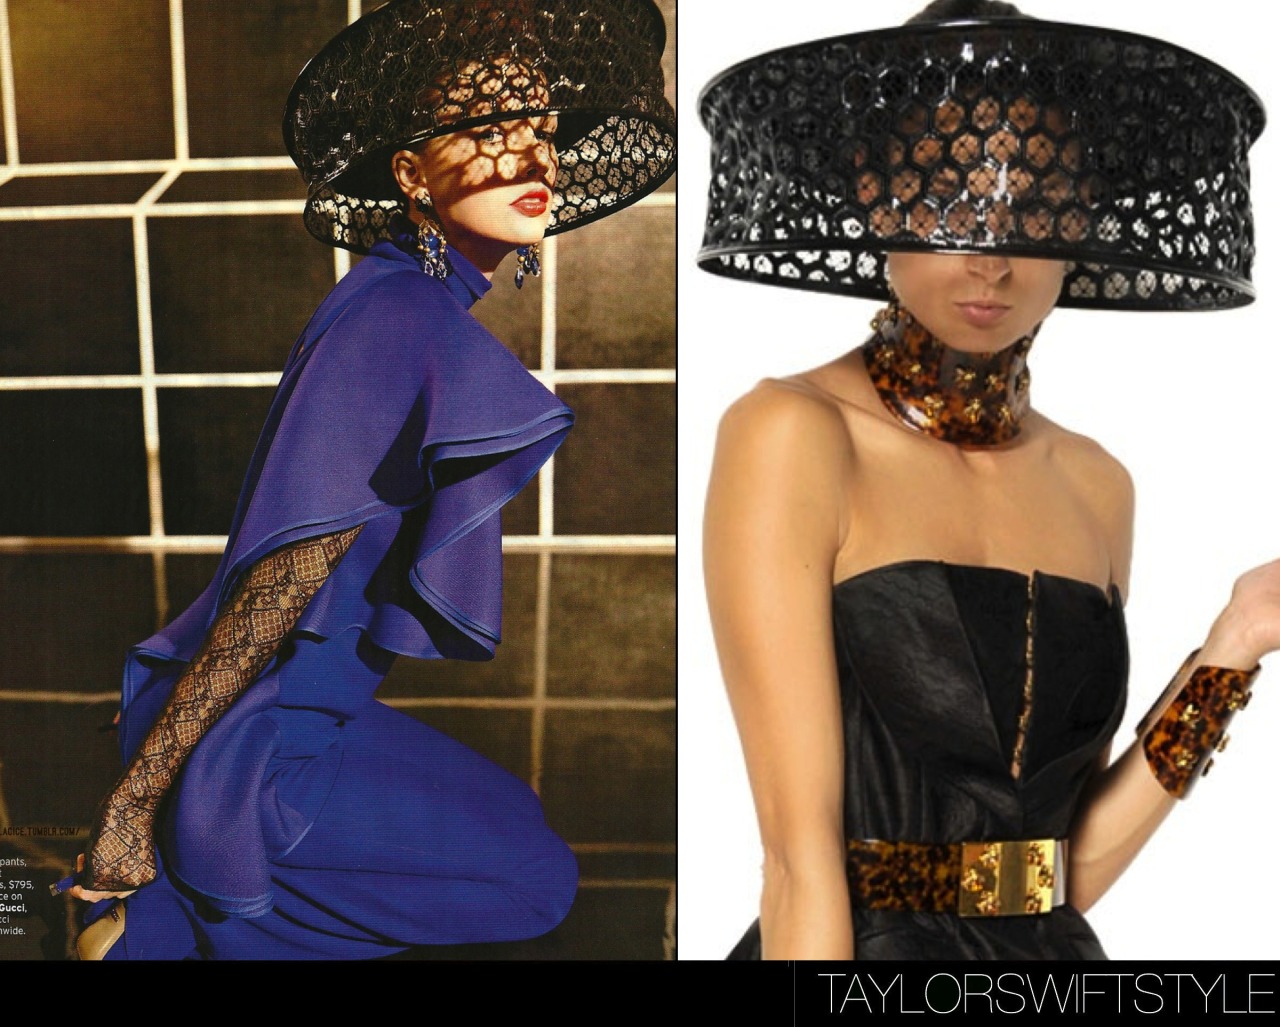 In a photo spread for Elle magazine | March 2013Alexander McQueen &#8216;Honeycomb Patent Lace Hat&#8217; - $1995.00My personal favourite look from the shoot. Taylor looks so couture with this beekeeper-inspired headpiece by the one and only Alexander McQueen&#8217;s Spring 2013 collection.Worn with: Gucci top/pants, Gucci earrings and Gucci booties